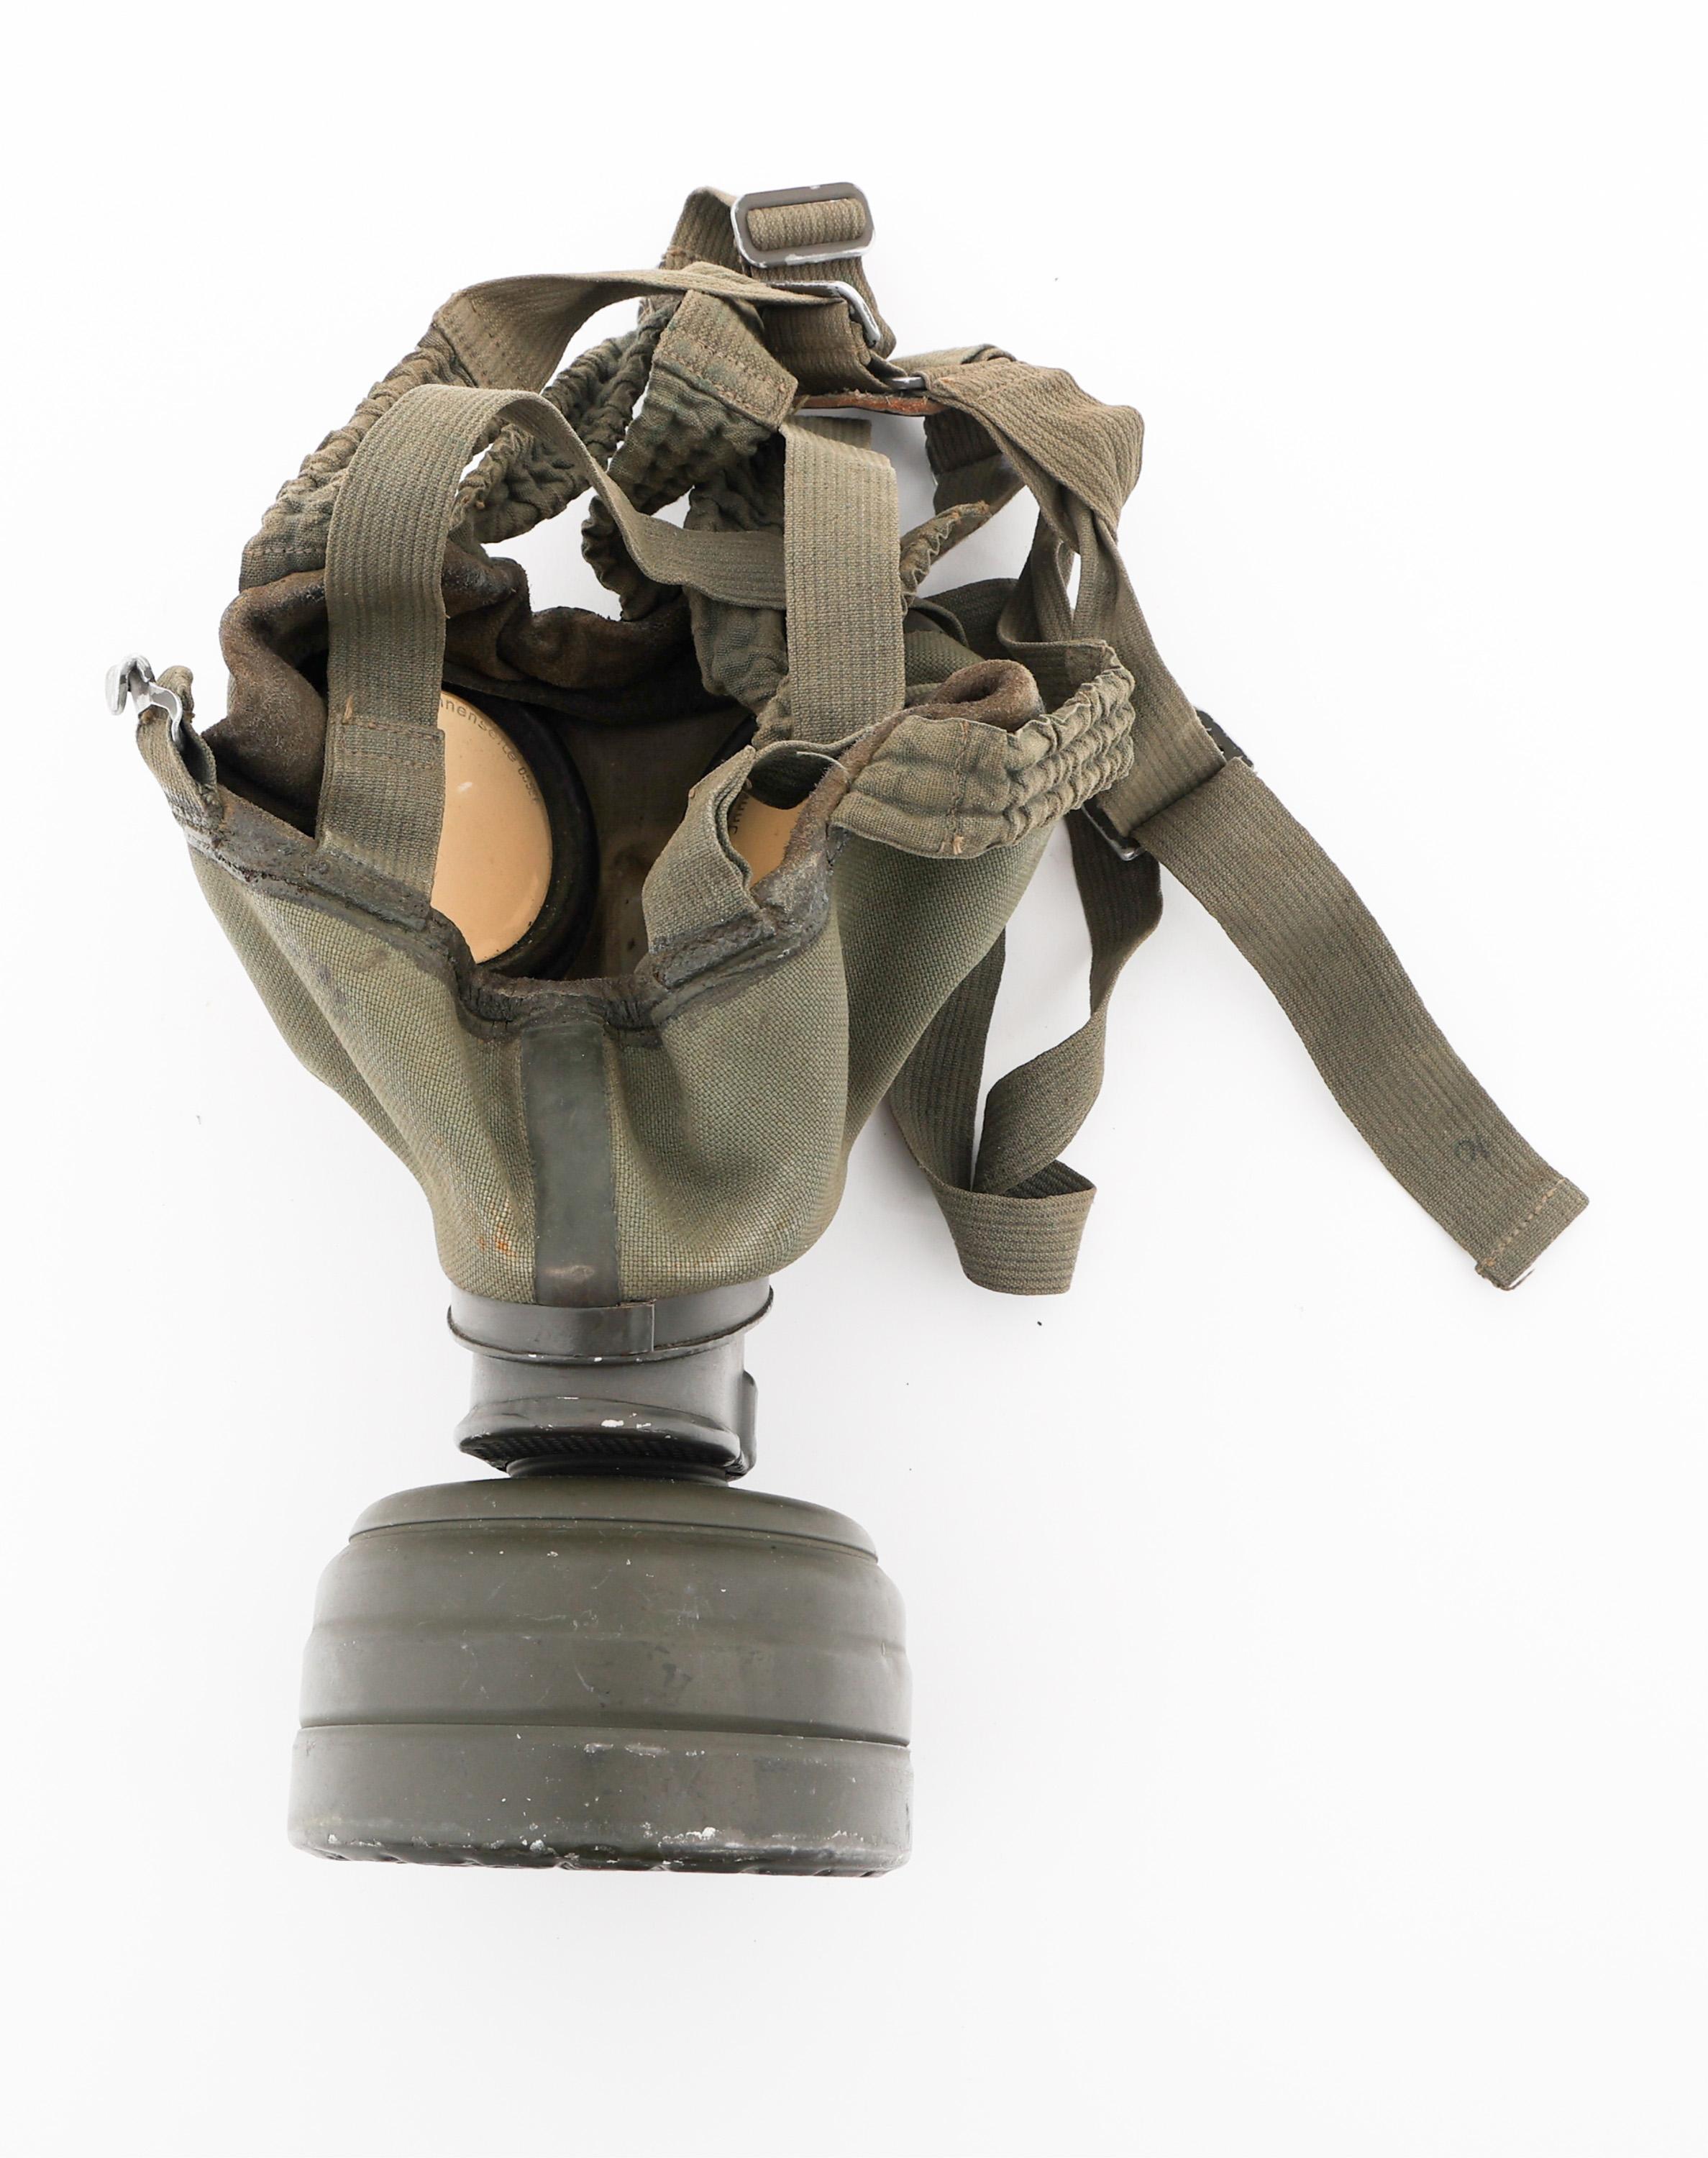 WWII GERMAN M38 GAS MASK & M42 CANTEEN